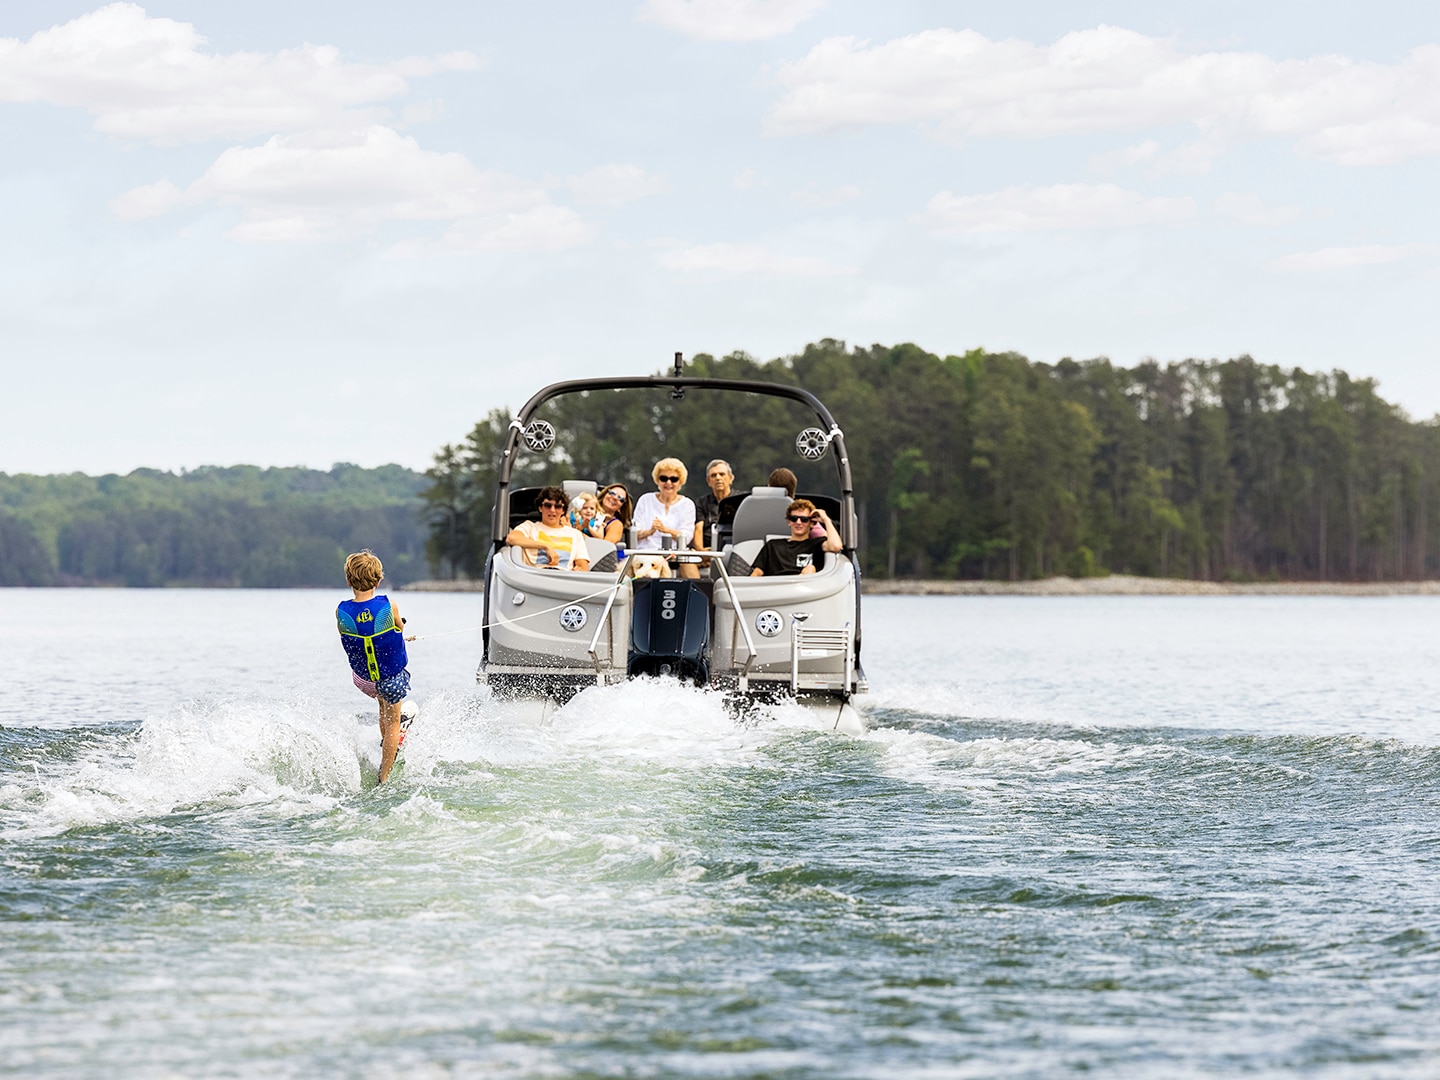 CAN A PONTOON BOAT PULL A SKIER?